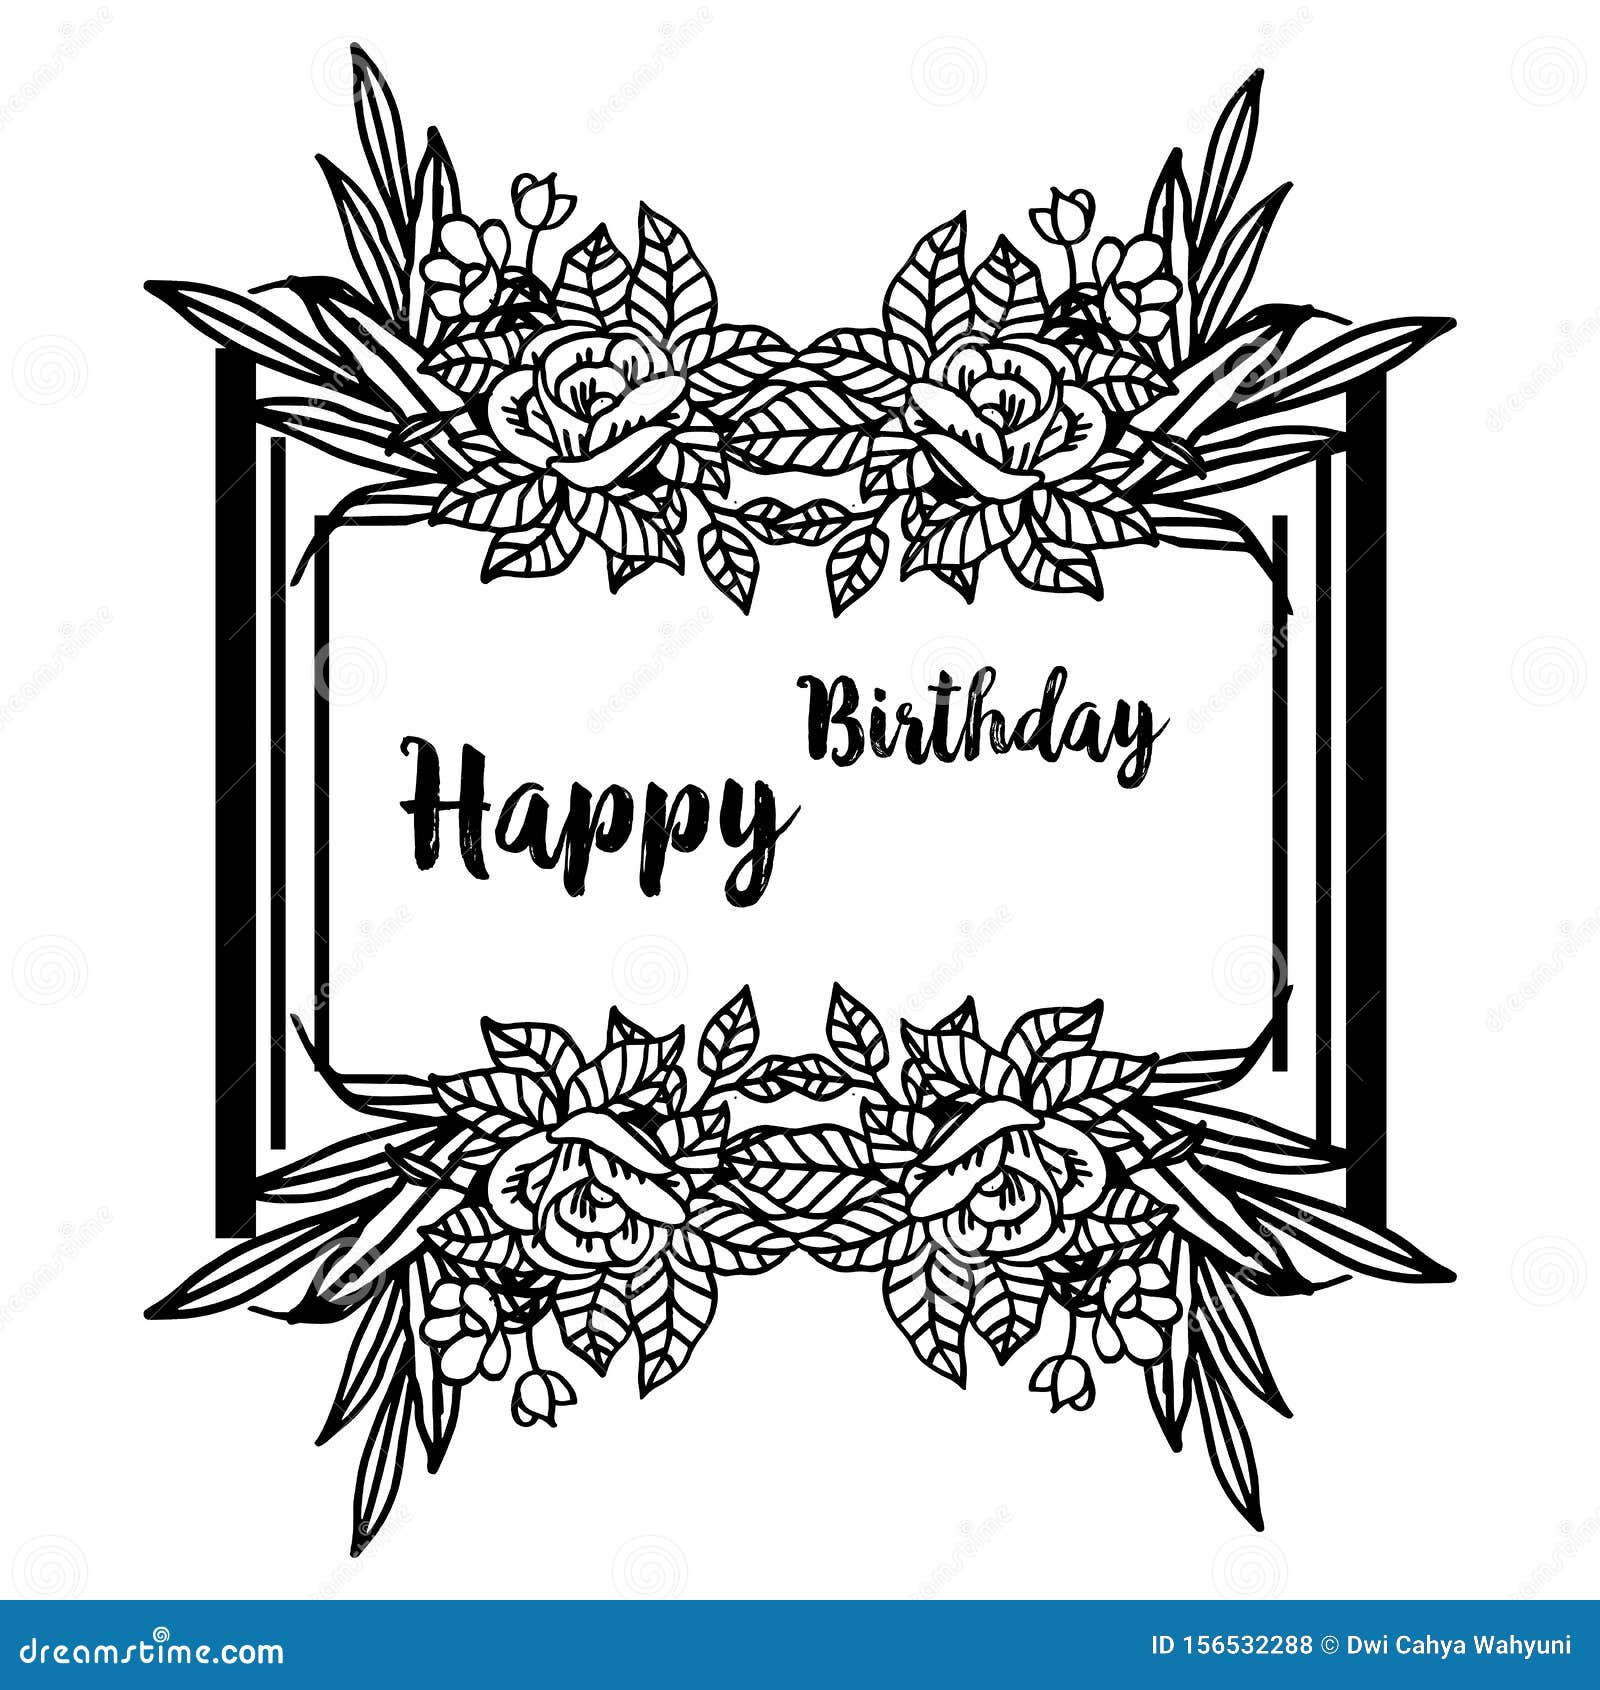 Background Design for Happy Birthday Card, with Vintage Flower Frame ...